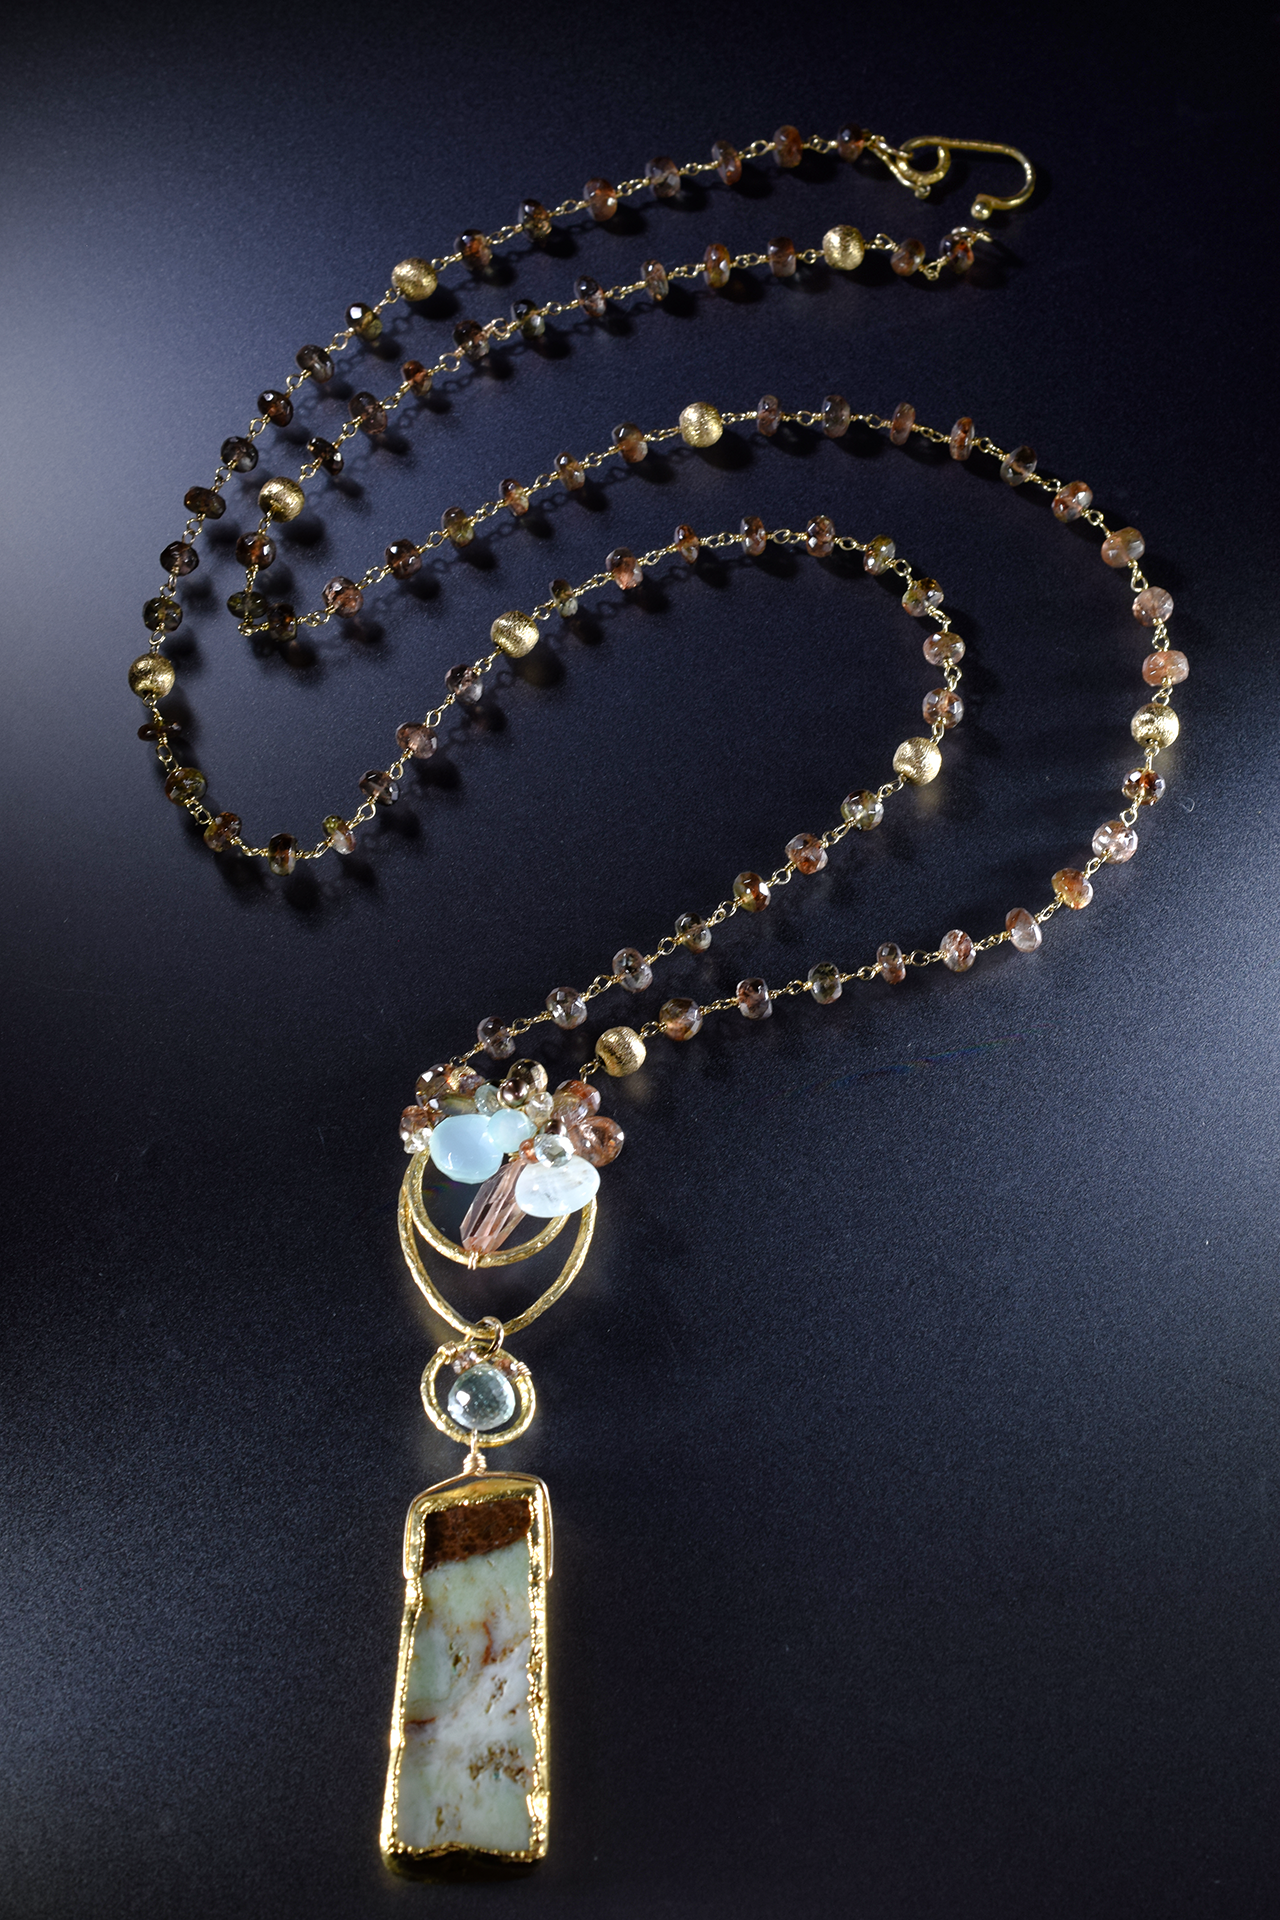 Long gold and gemstone necklace